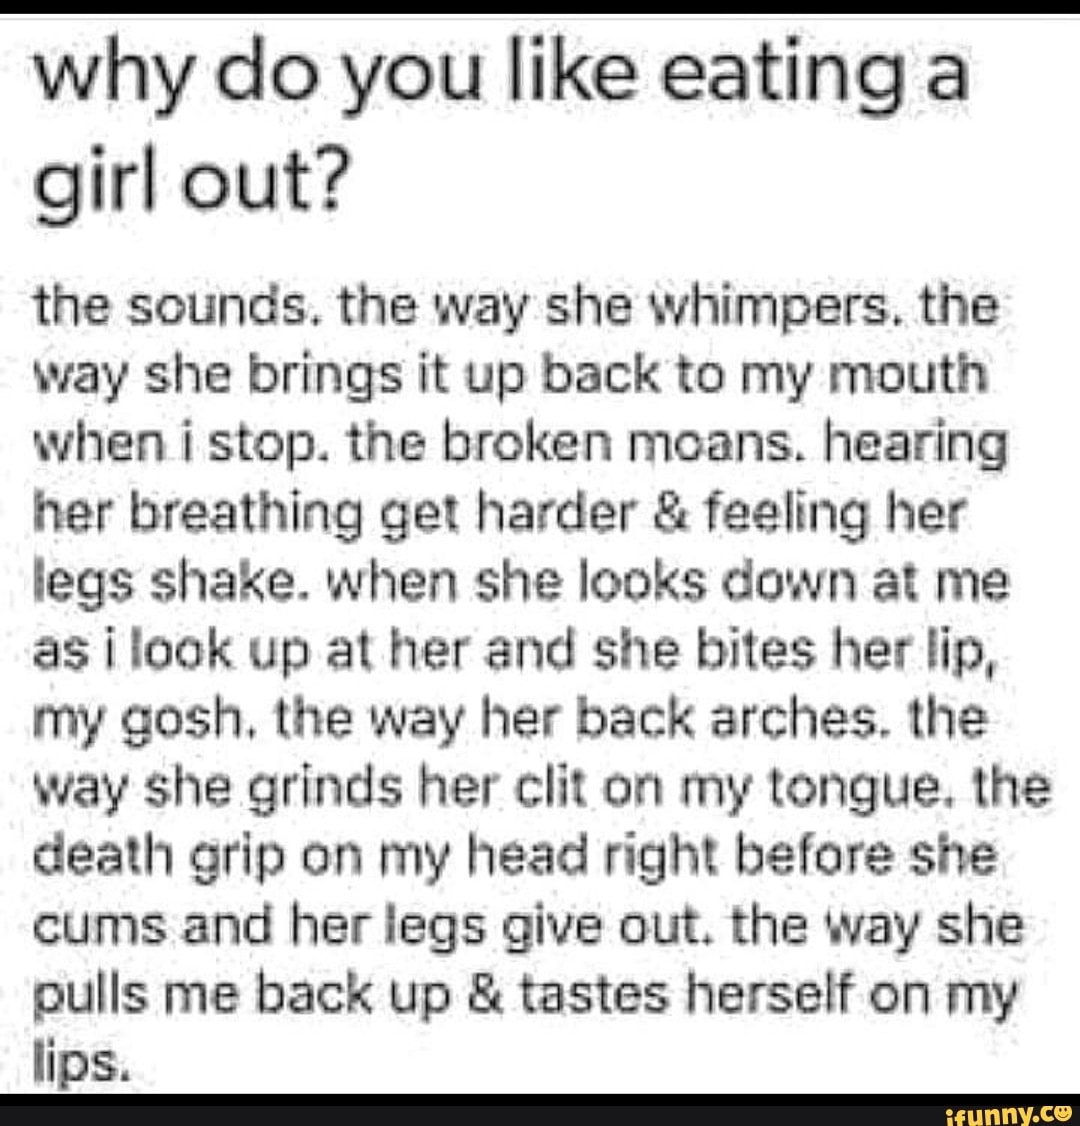 behrooz shahsavari recommends Eating A Girl Out Meme